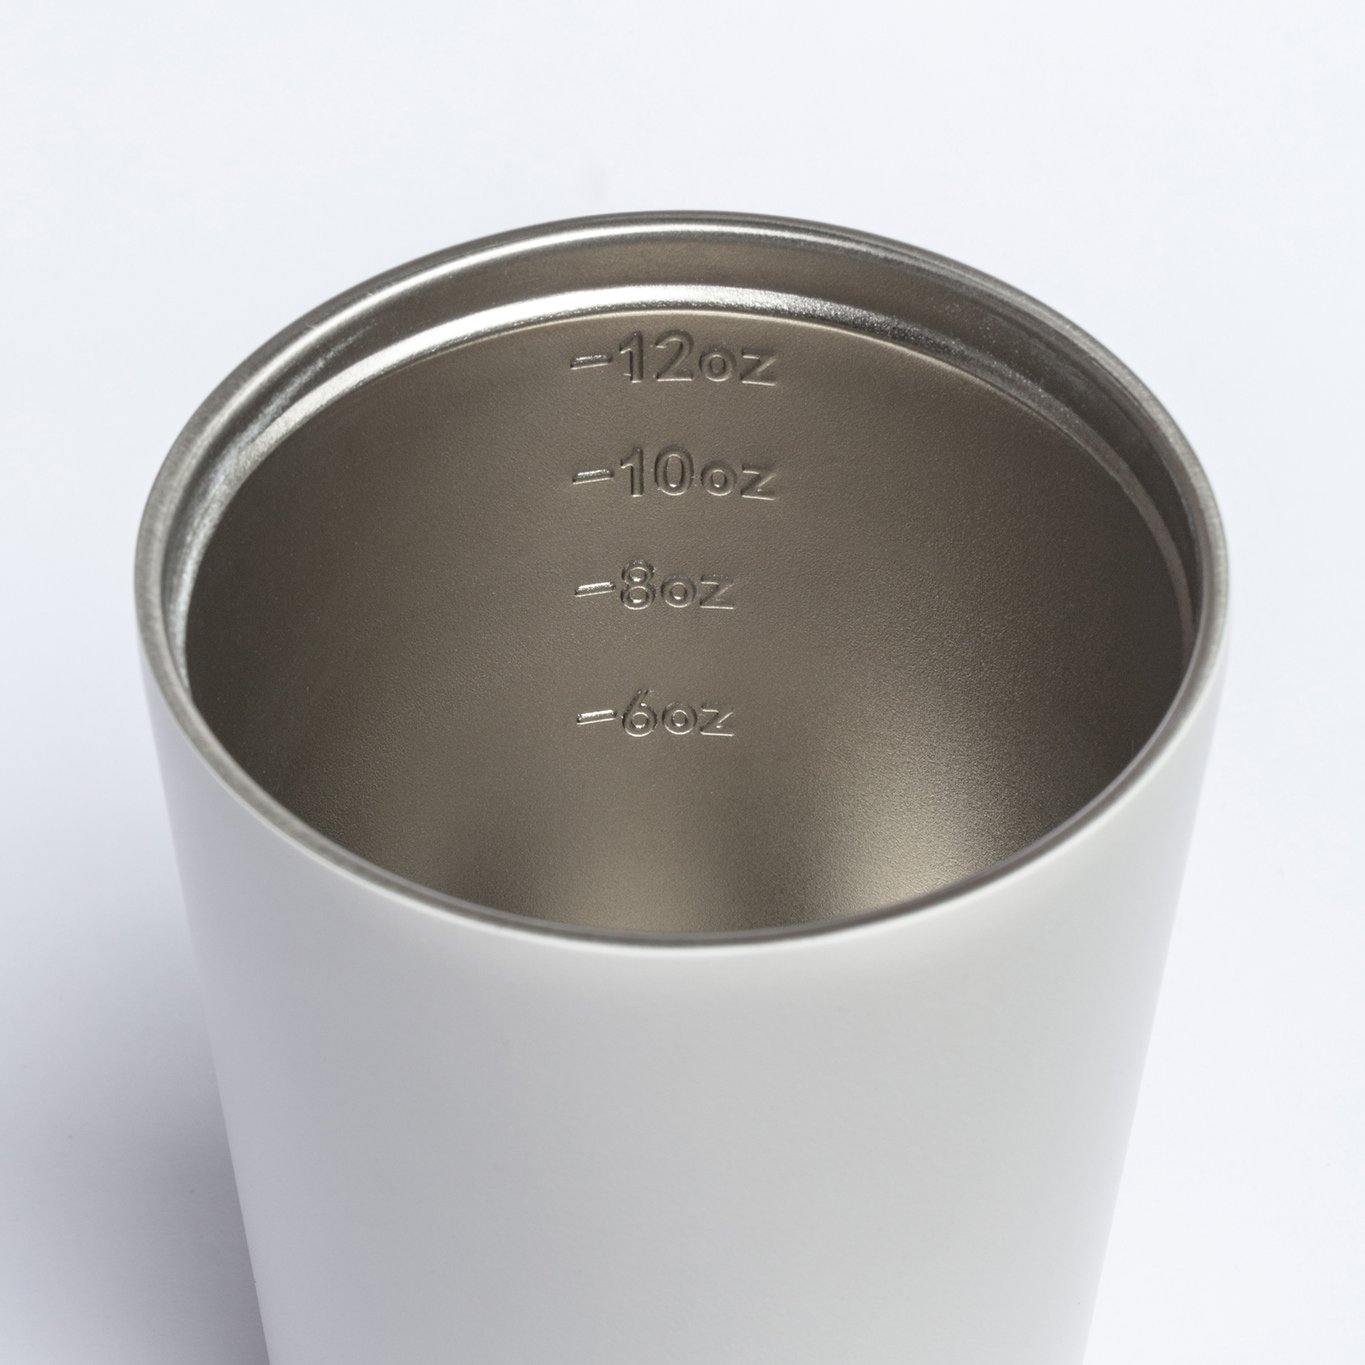 Fressko Camino Cup 12oz - White | Re Usable Coffee Cup | reusable cup | Take away Coffee Cup | Cafe Coffee Cup | Best Reusable coffee cup | Refillable Coffee Cup | Eco Coffee Cup | Camping cups | Kids cups | Cups | Reusable tea cup | personalised coffee cup Australia | online reusable coffee cup Australia | custom coffee cups | Upcycle Studio